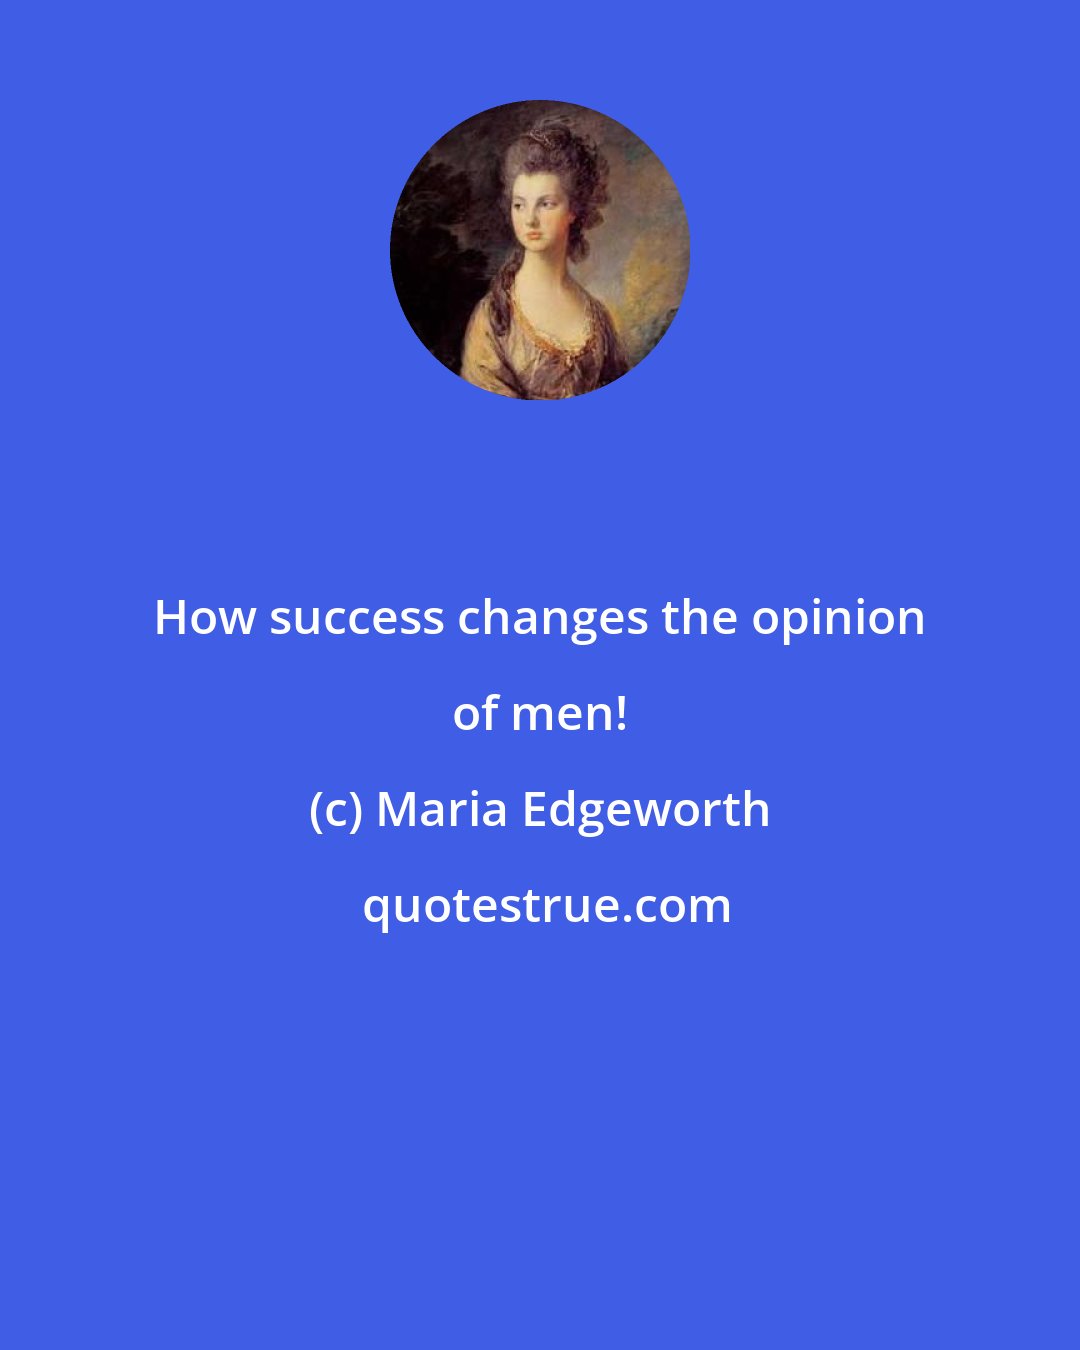 Maria Edgeworth: How success changes the opinion of men!